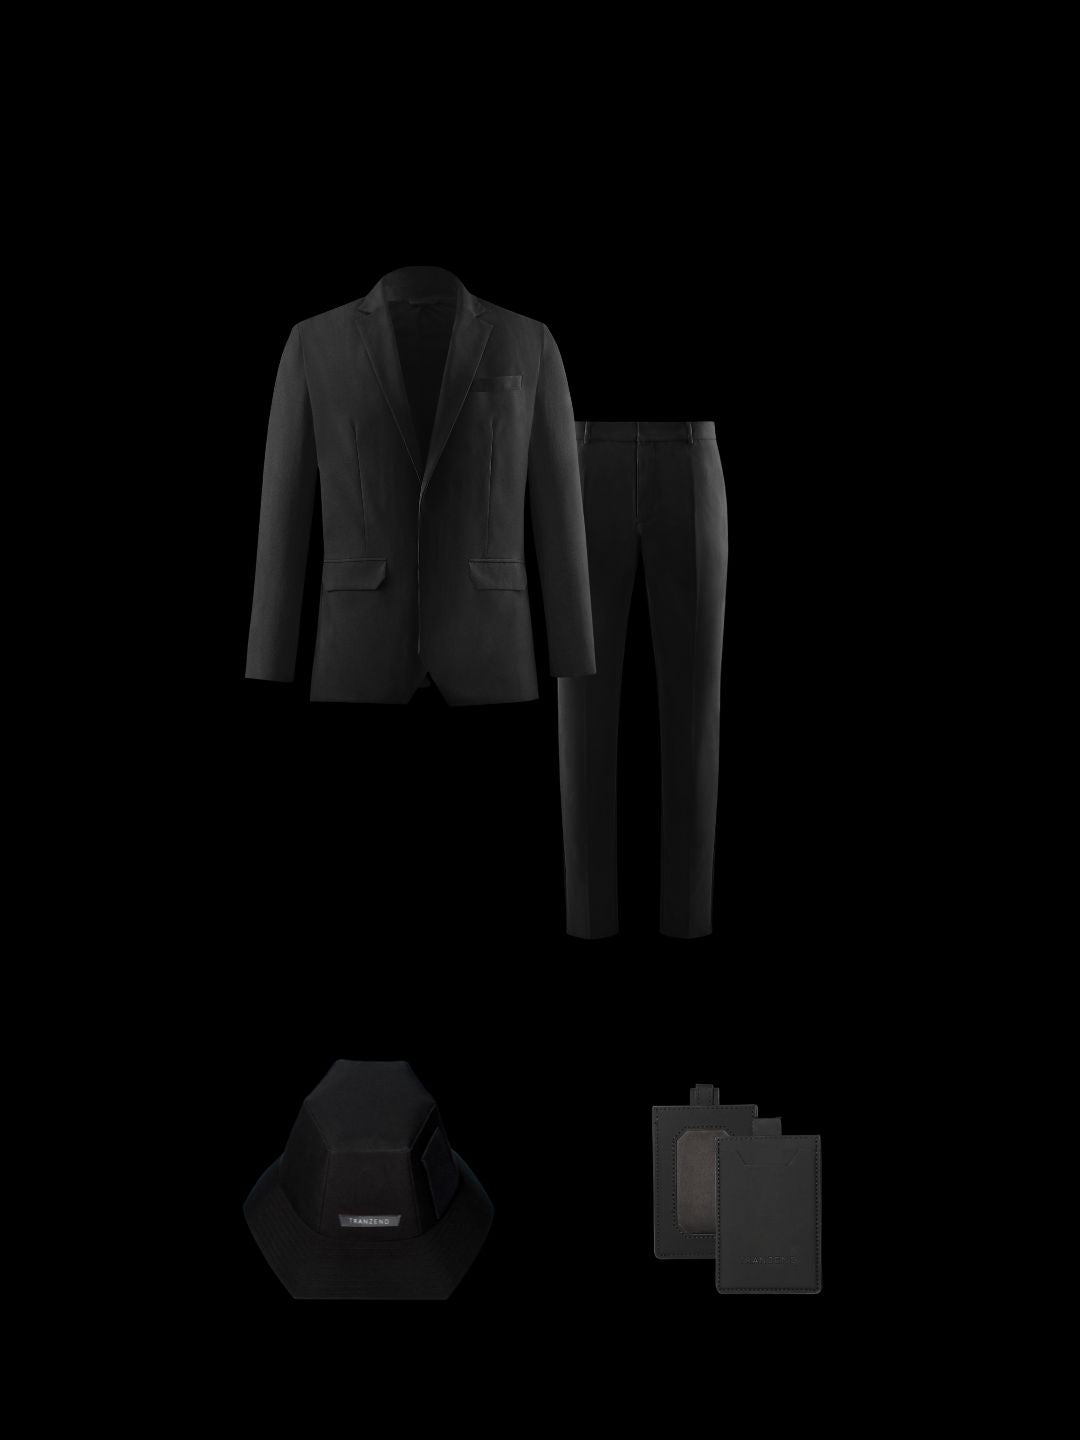 Ultra Suit 3.0 Single Breasted Full Set Black + M-system